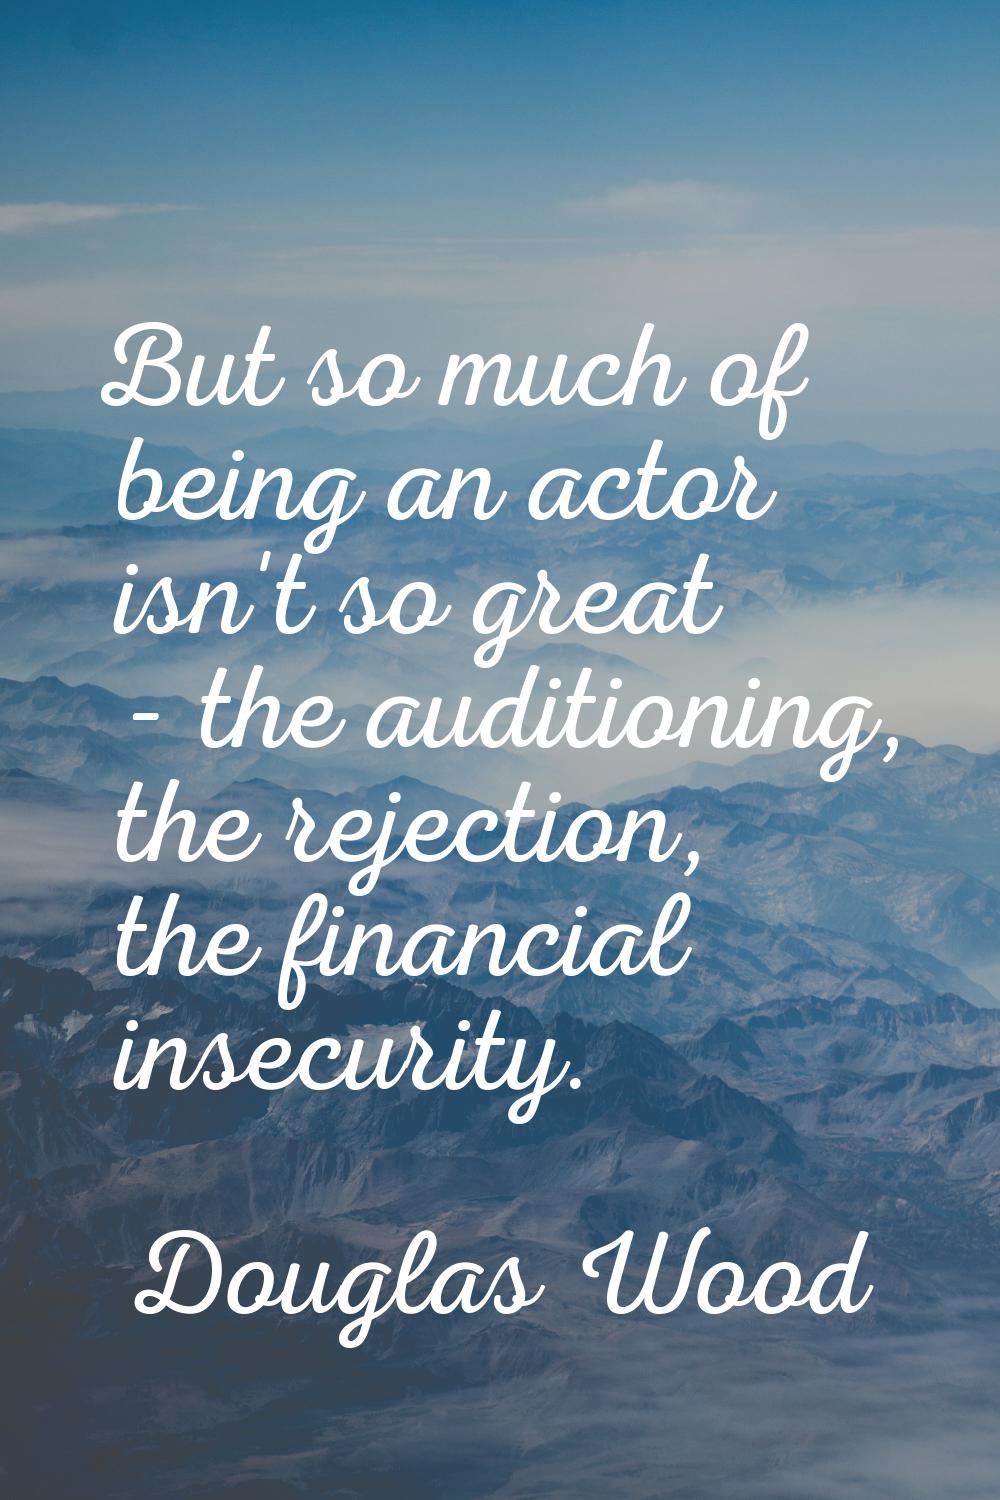 But so much of being an actor isn't so great - the auditioning, the rejection, the financial insecu